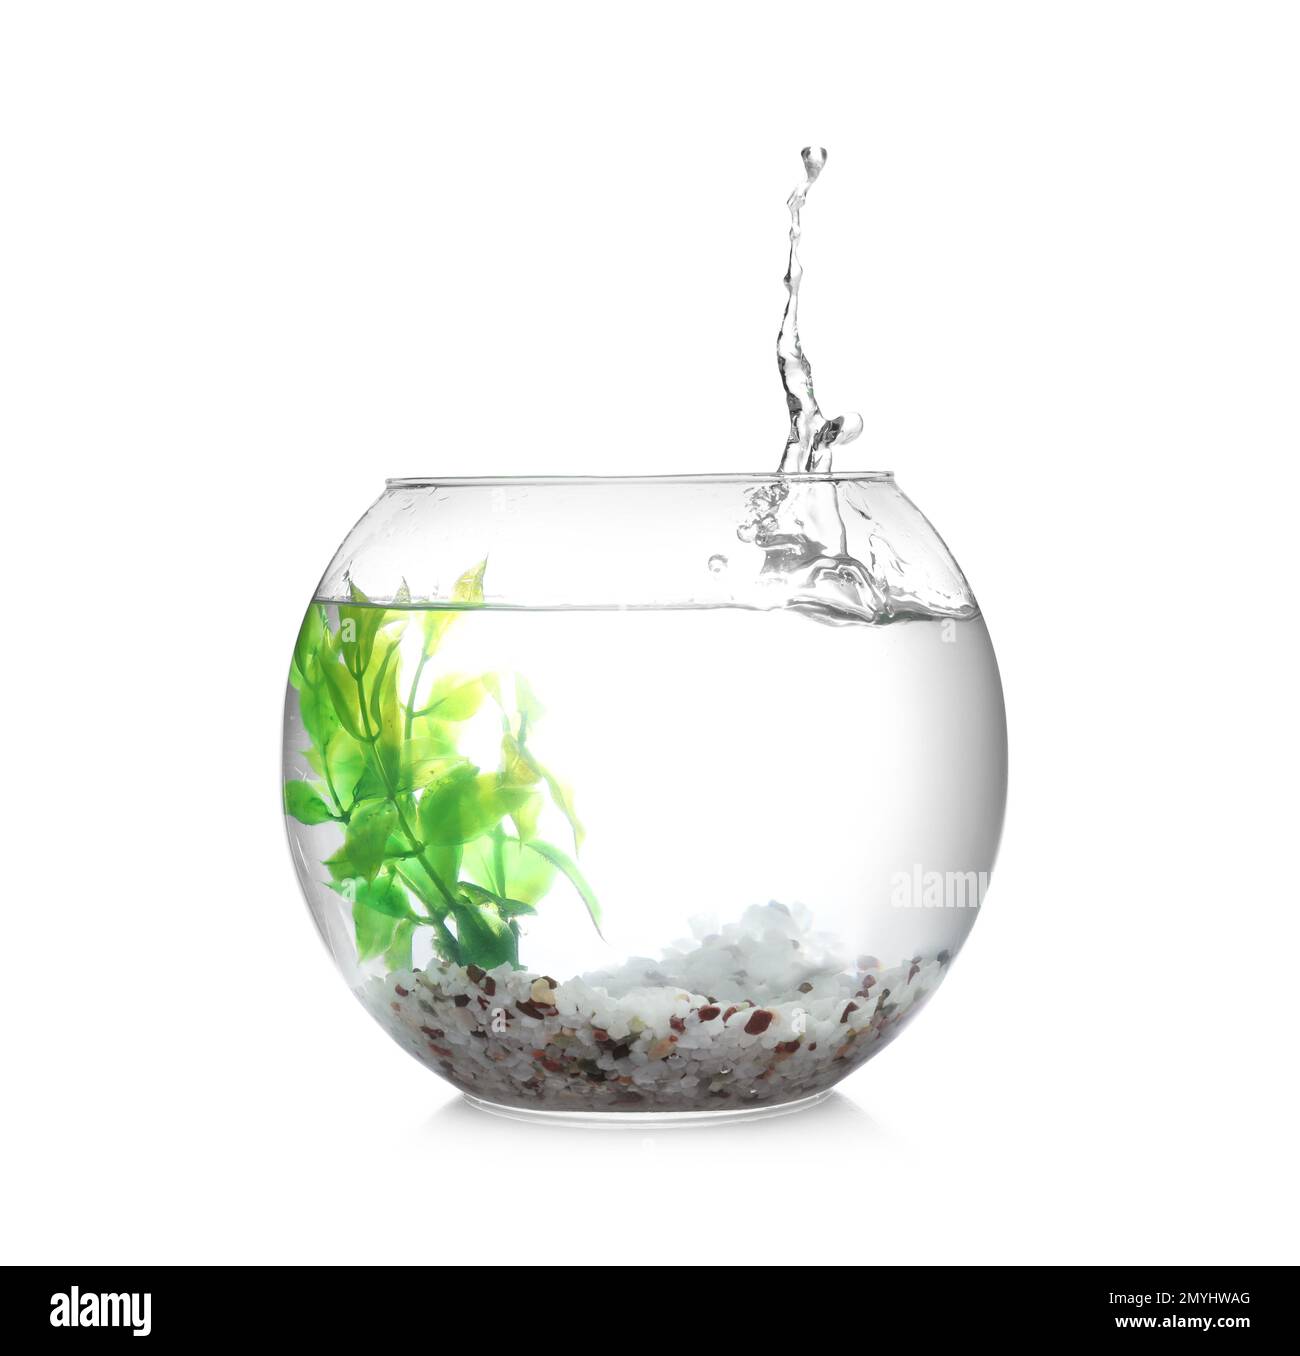 Splash of water in round fish bowl with decorative plant and